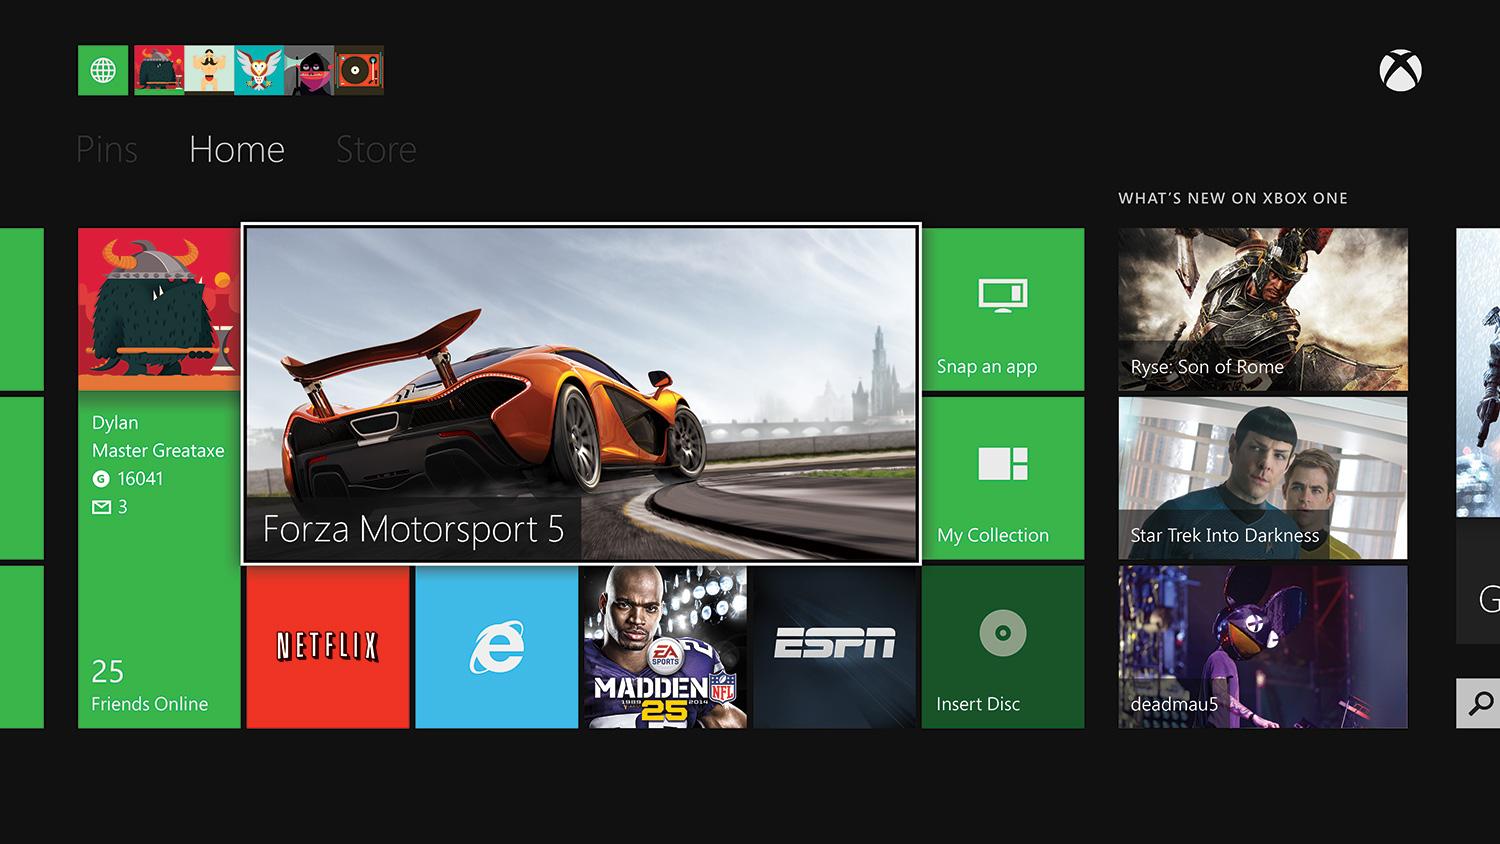 New Gamertag options come to Xbox Live - Polygon